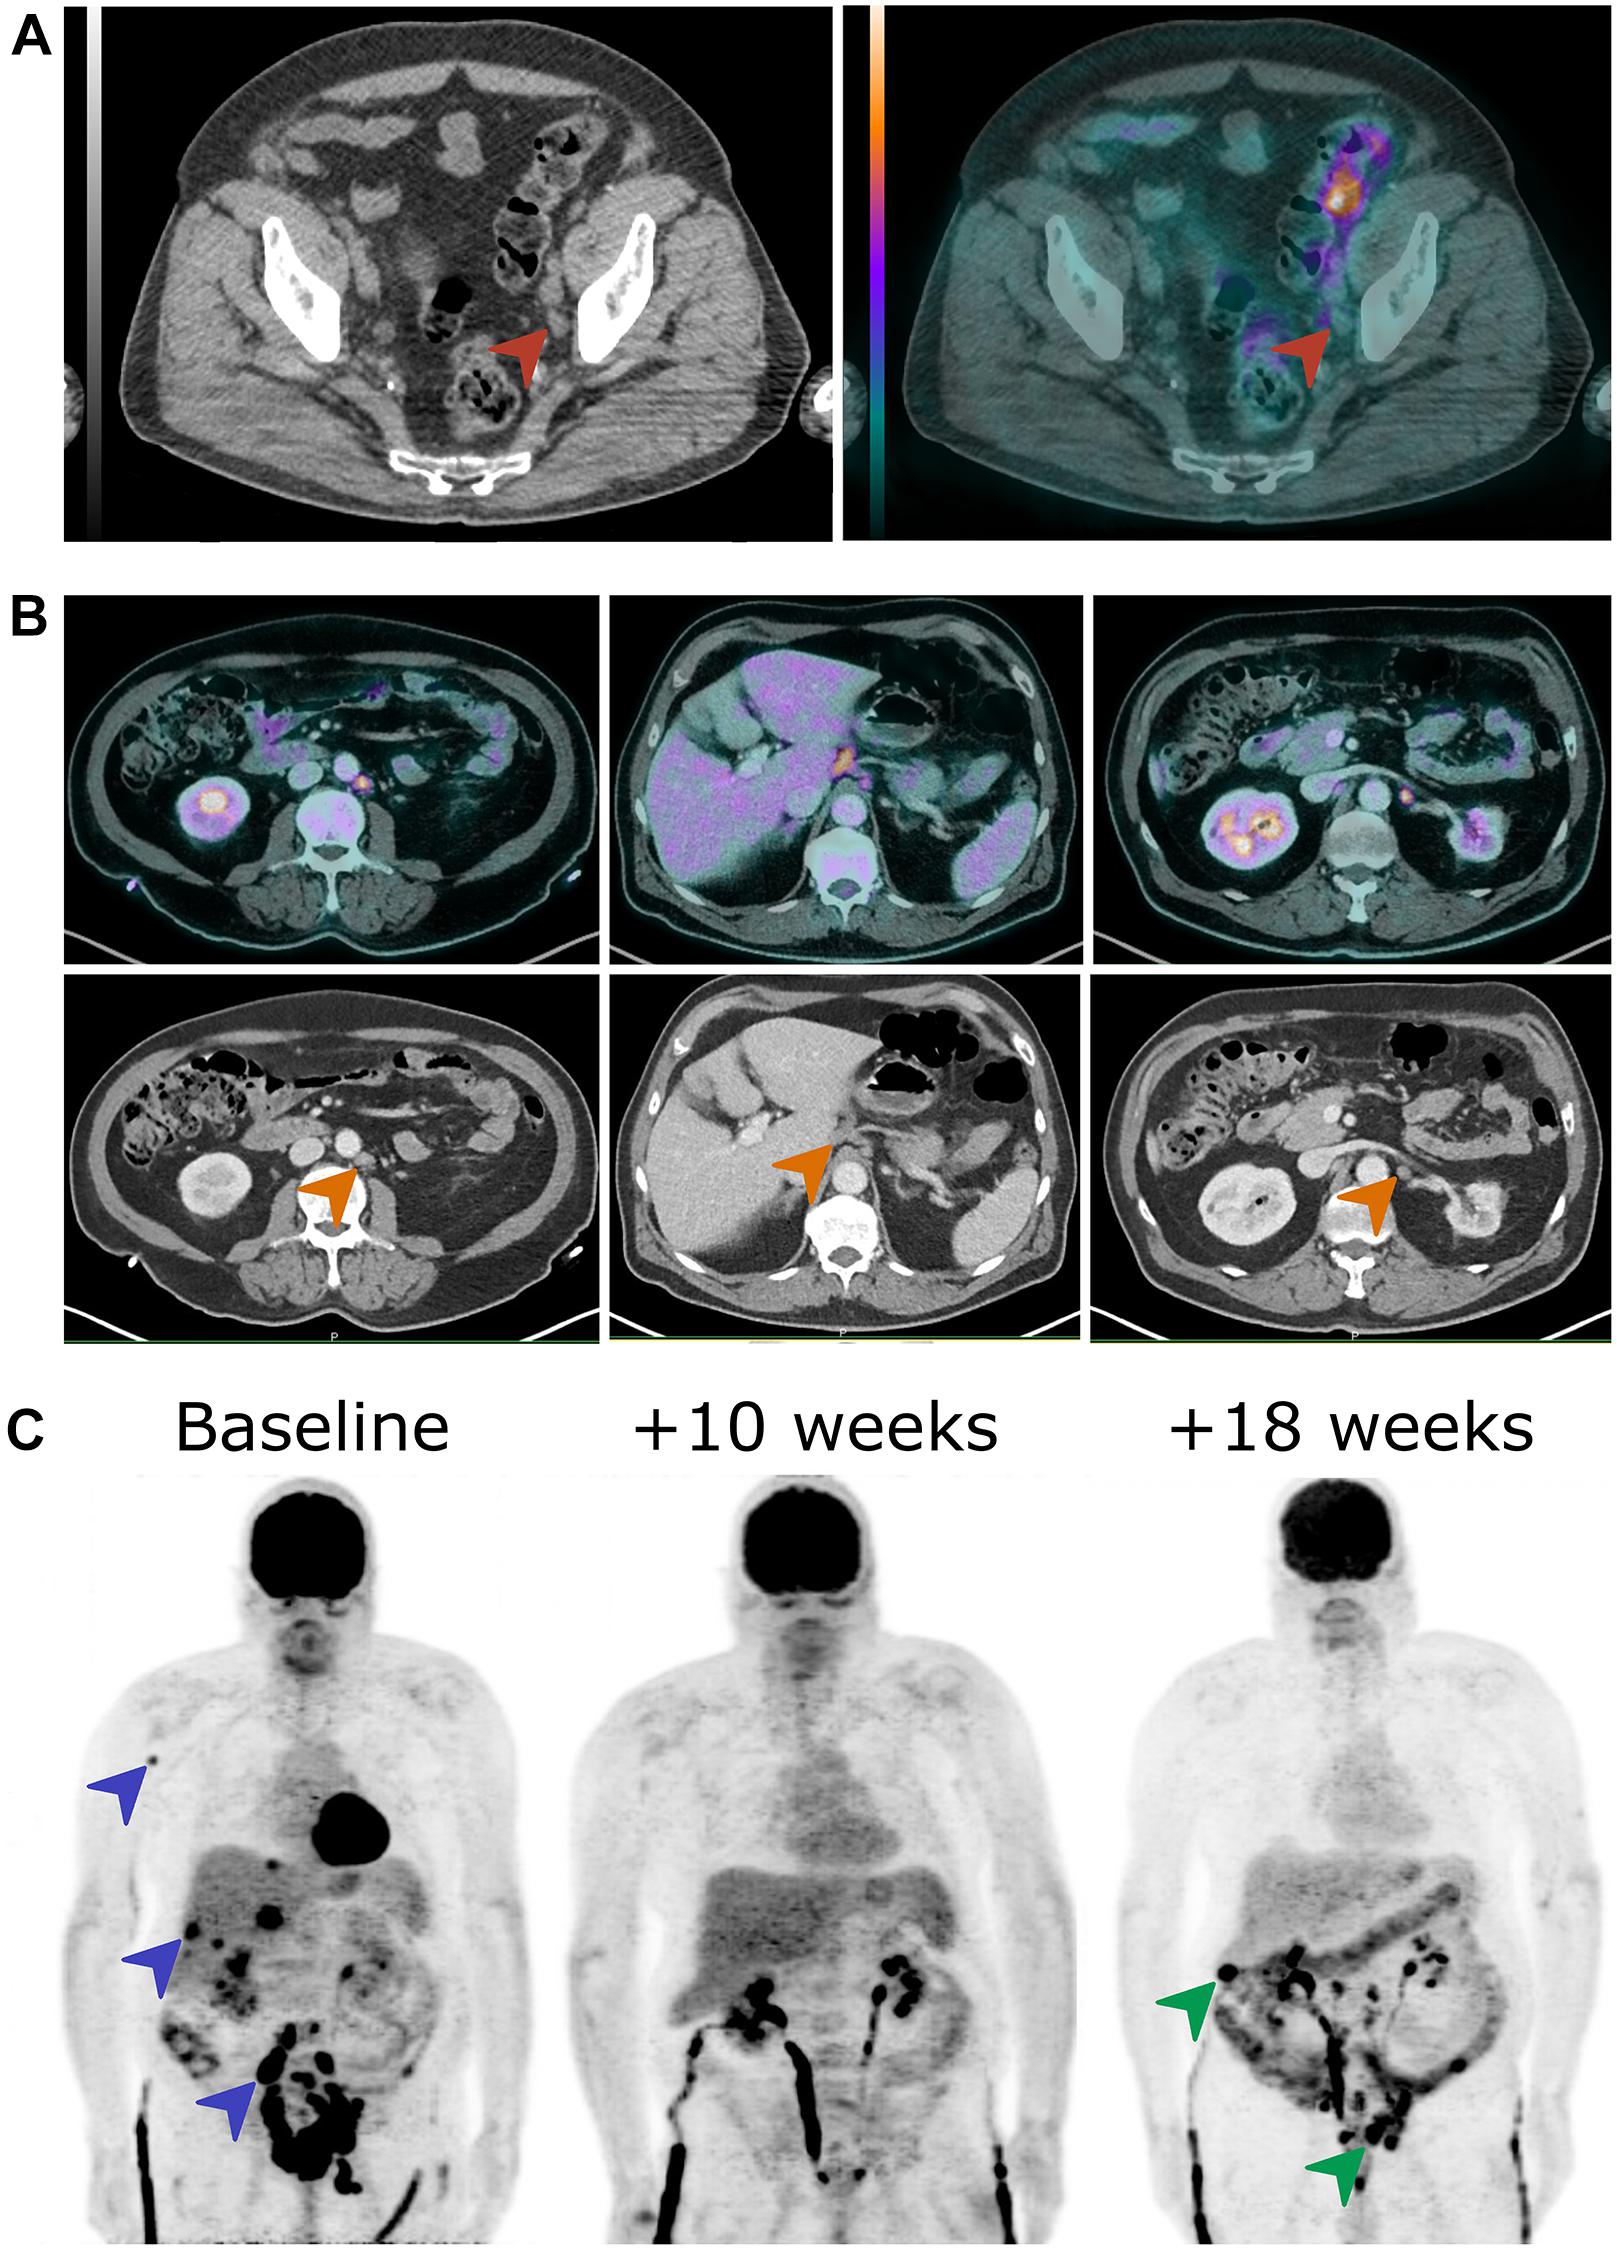 Frontiers | The Role of 18F-FDG PET/CT in Guiding Precision Medicine